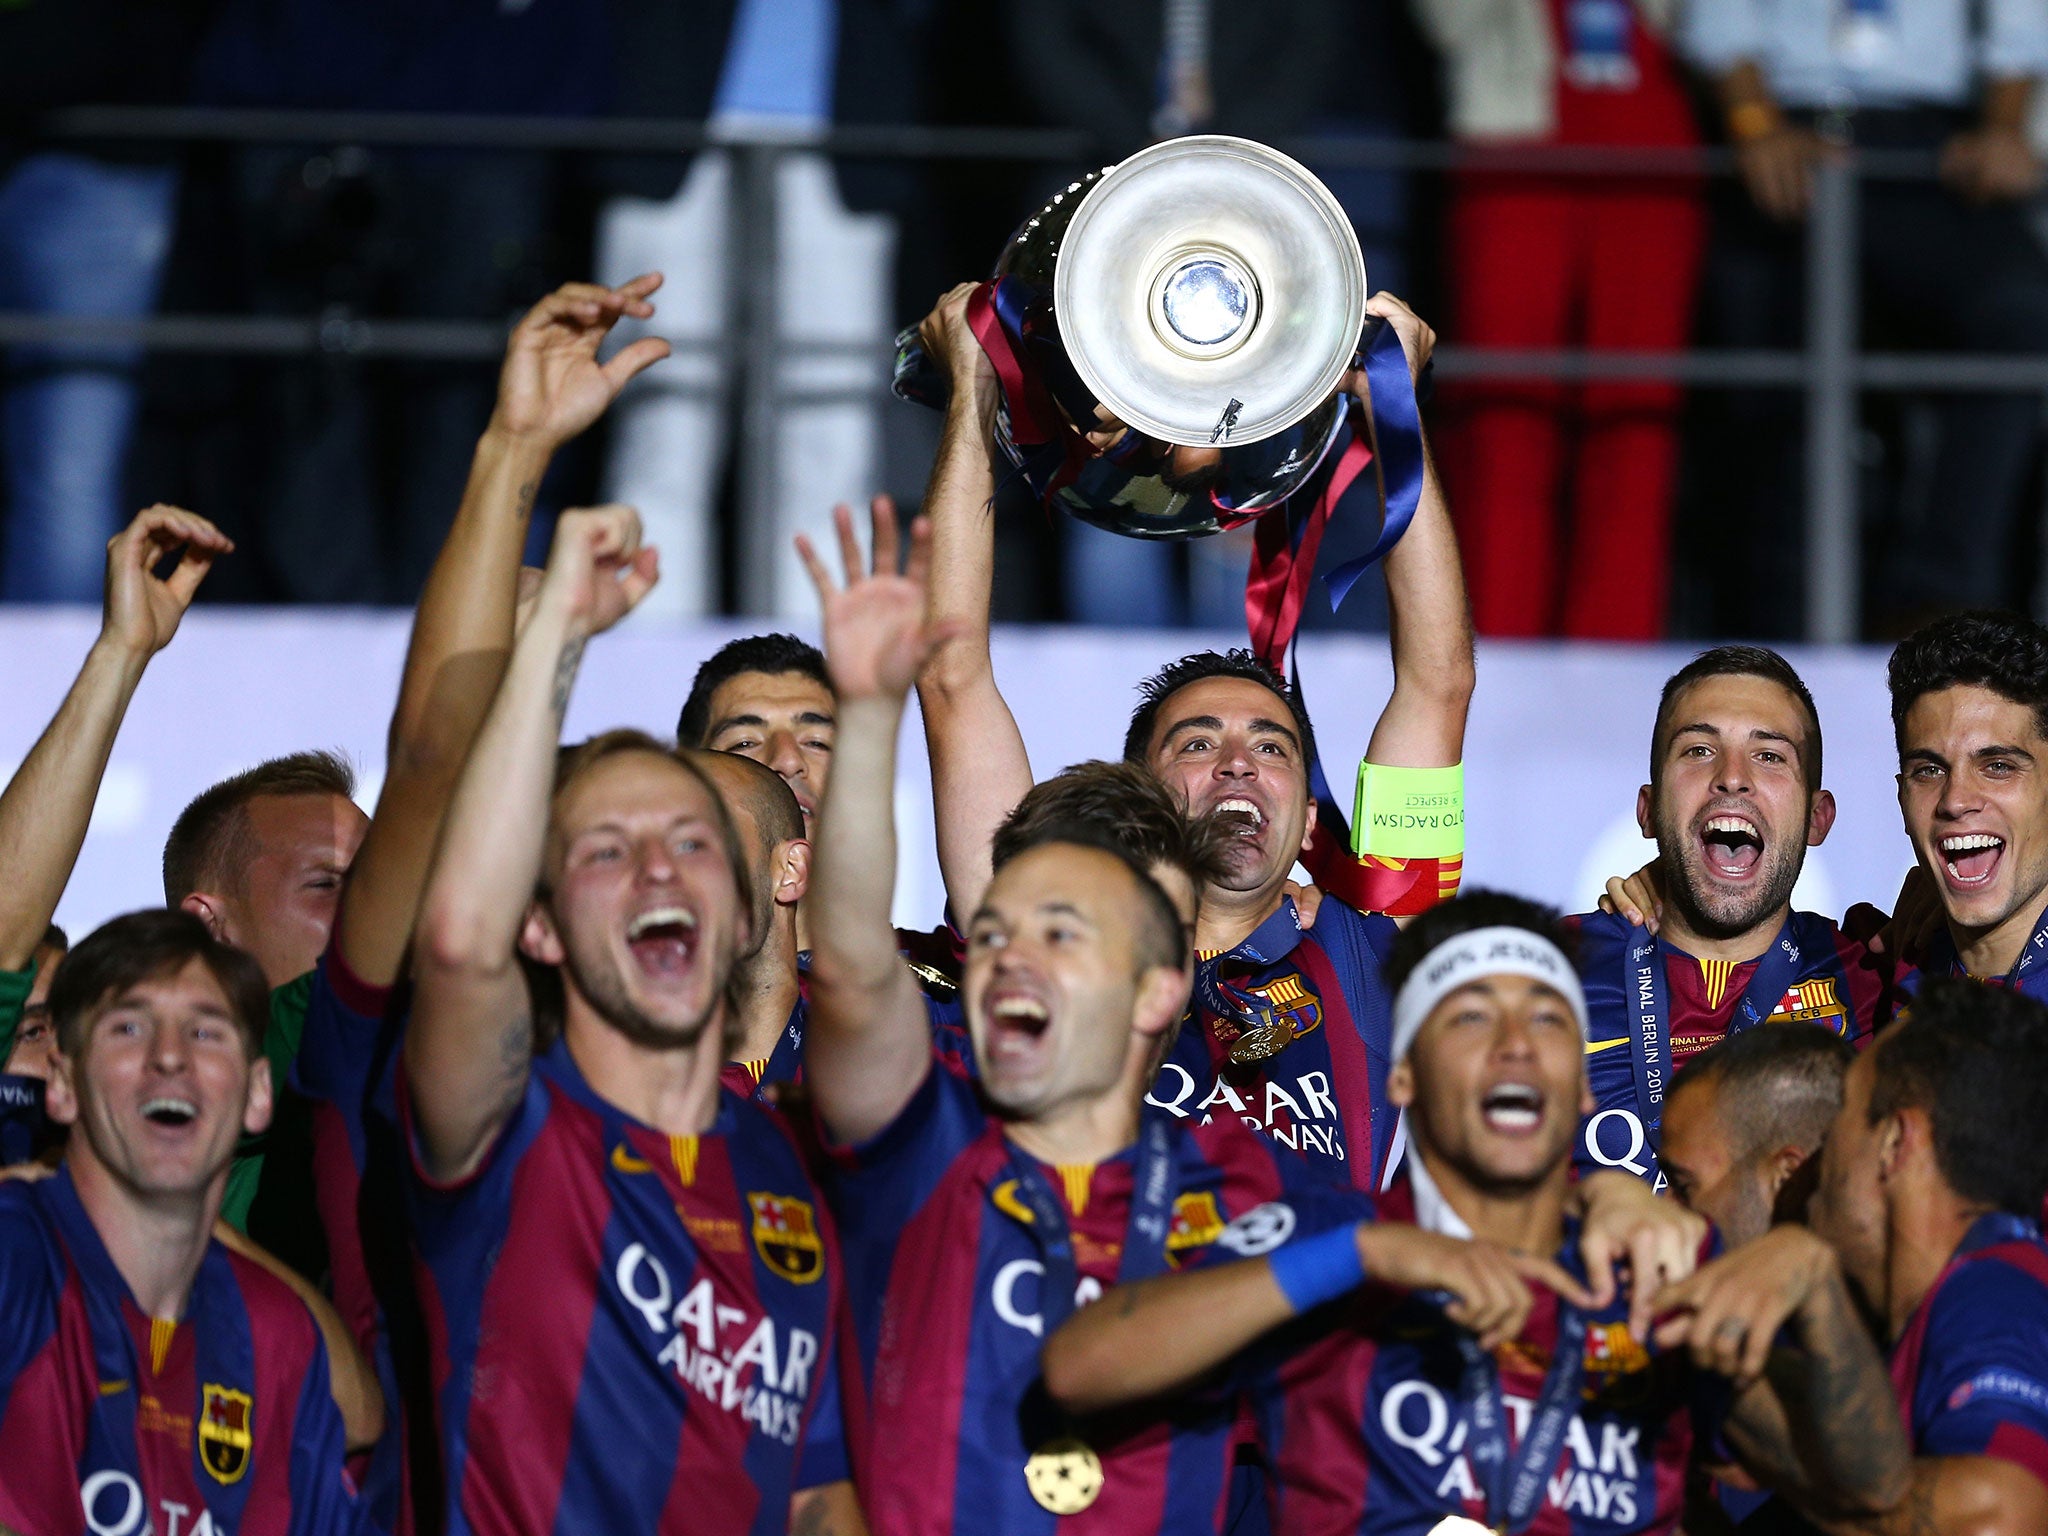 Barcelona won the Uefa Champions League in 2014/15